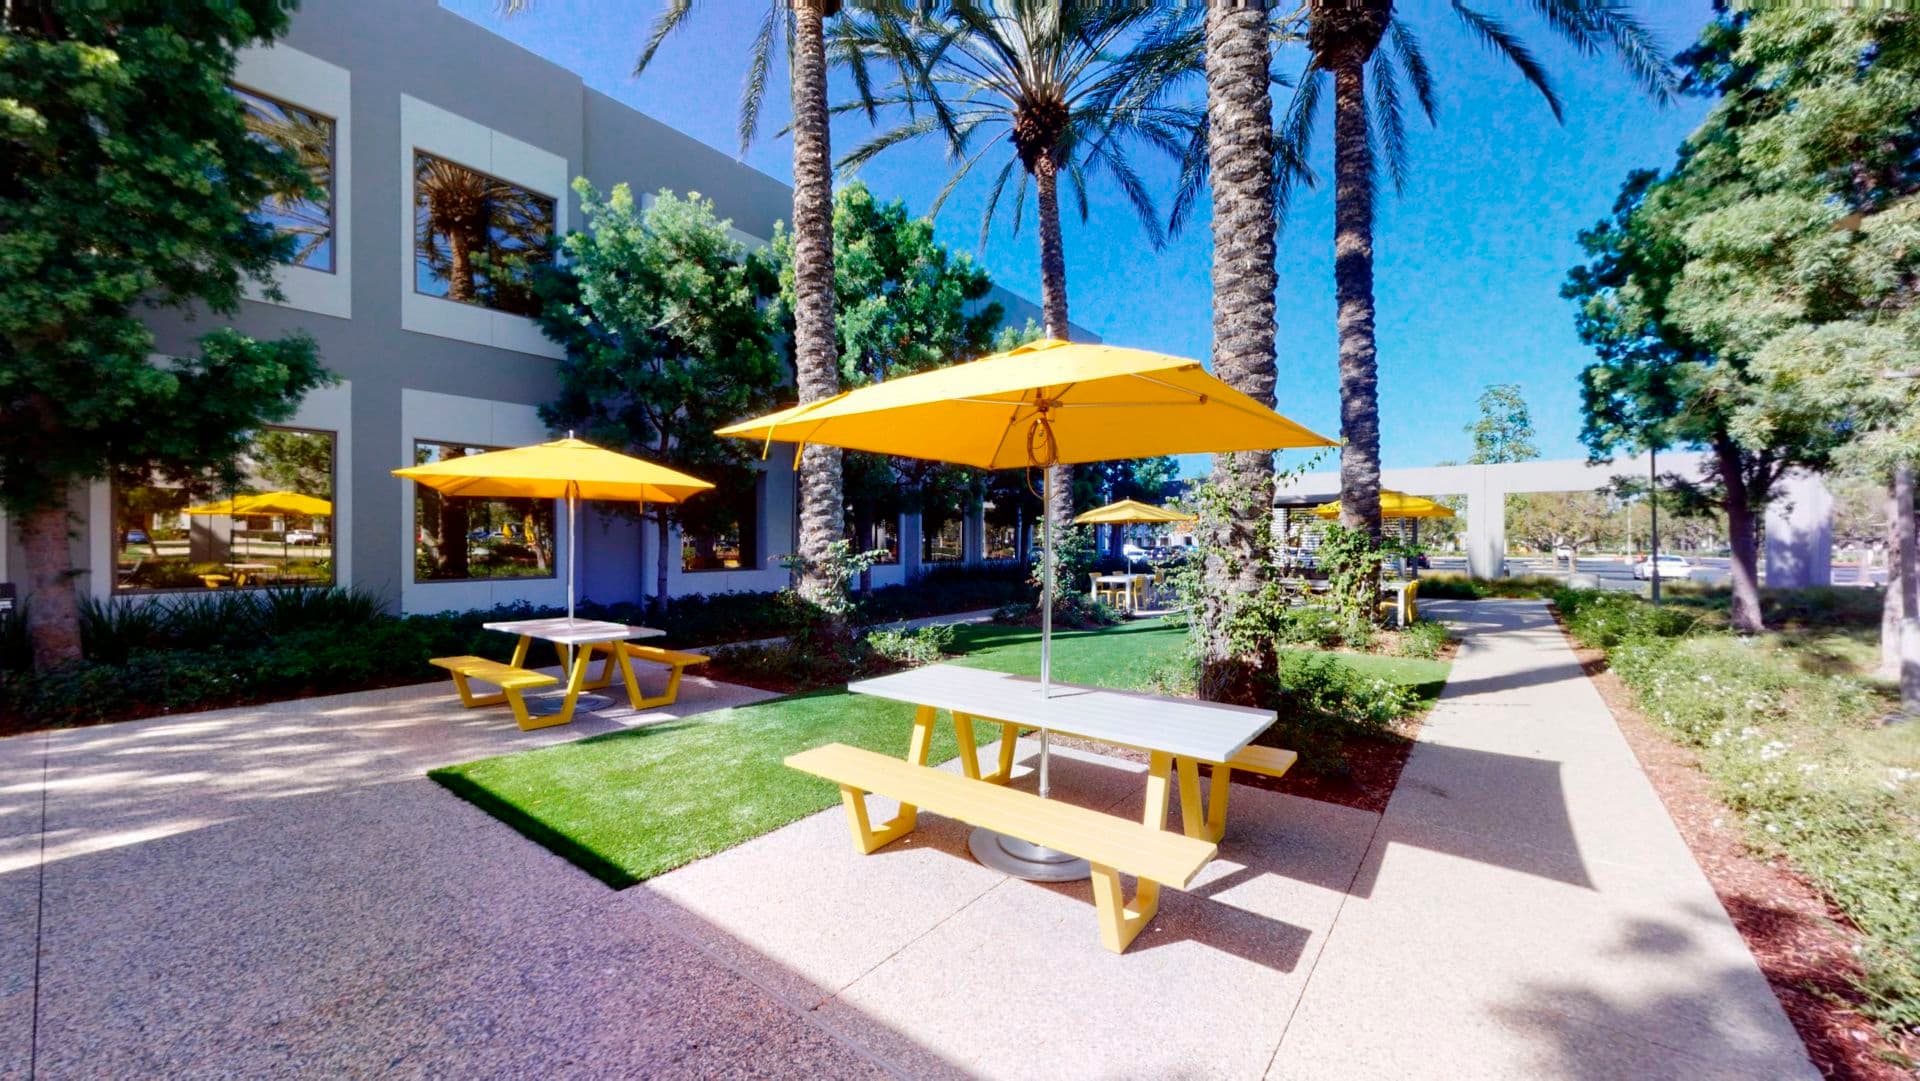 Exterior photography of Outdoor Workspace 430 Exchange at Market Place Center, Irvine CA.